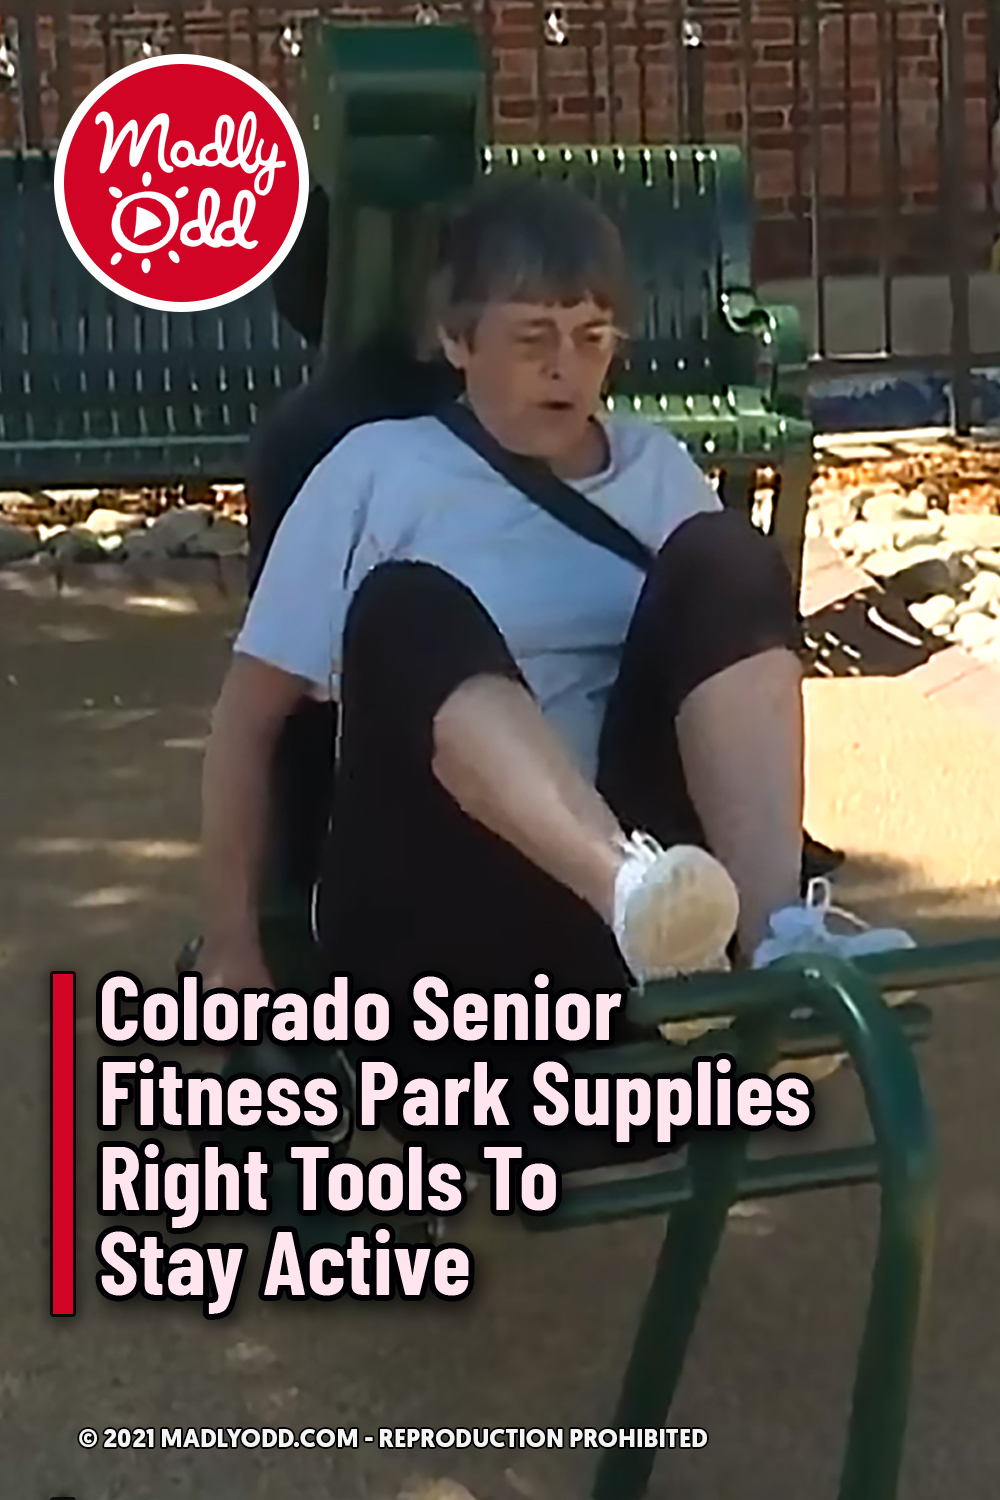 Colorado Senior Fitness Park Supplies Right Tools To Stay Active